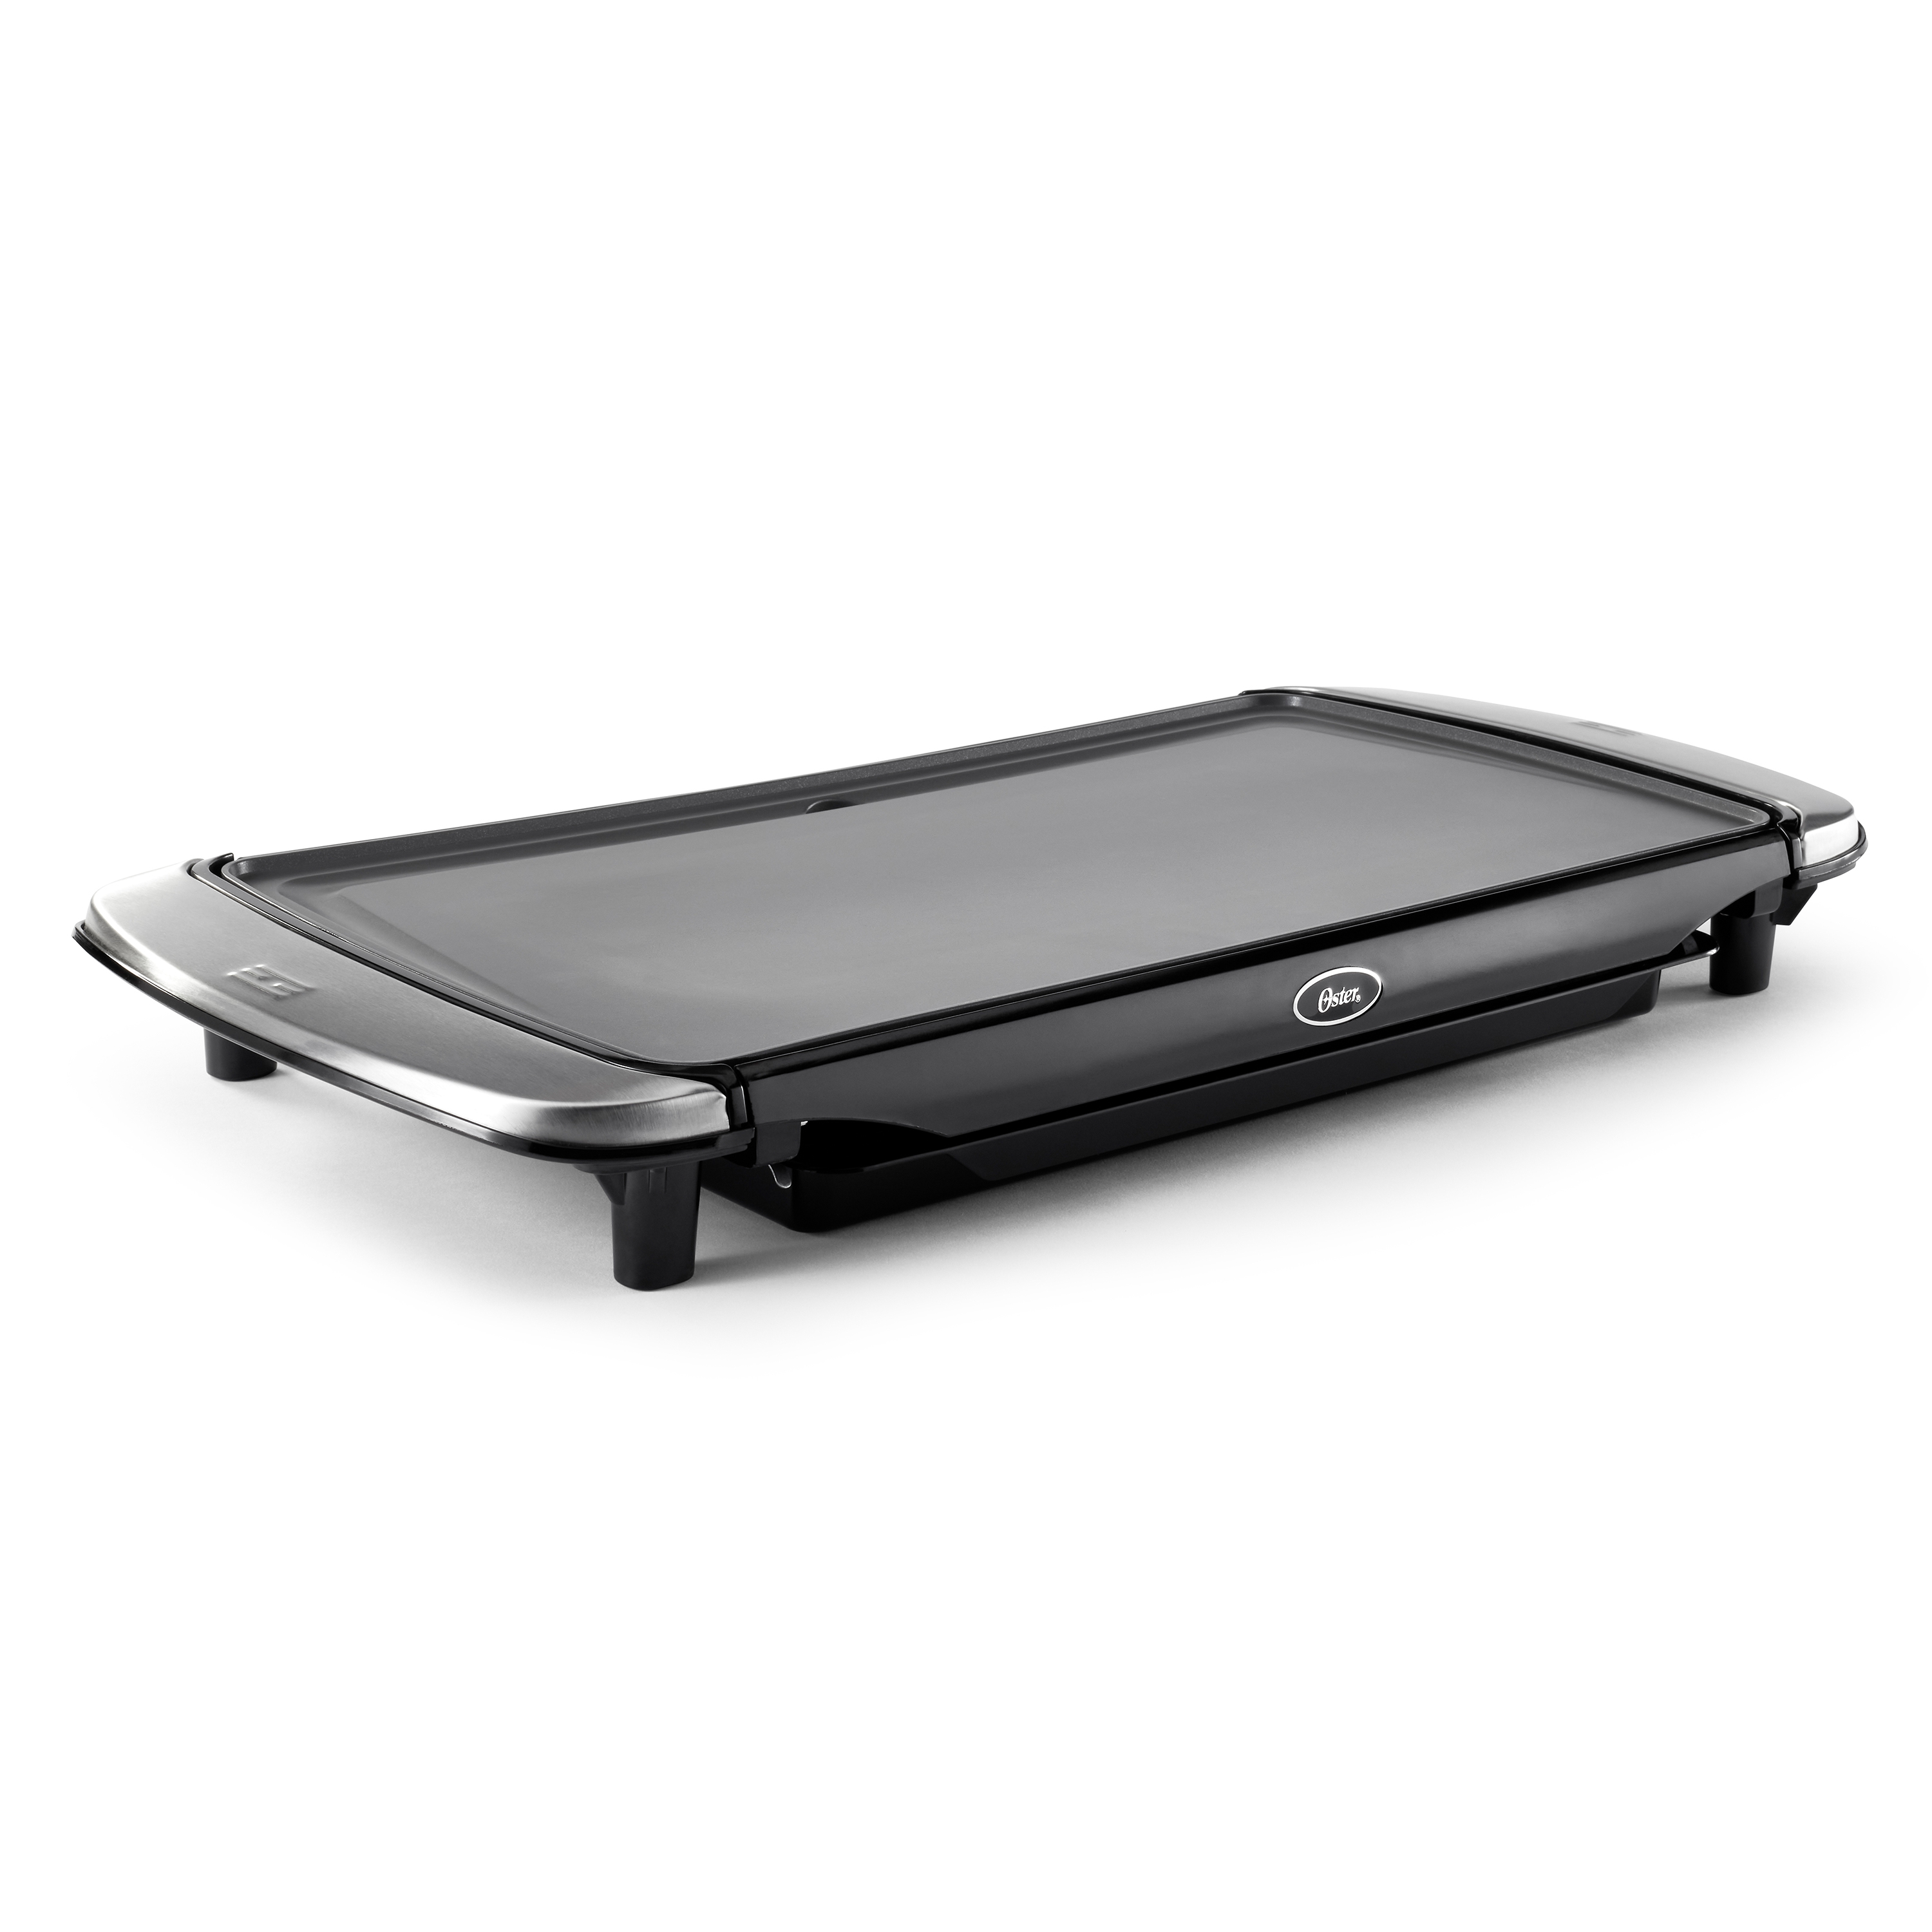 Oster DiamondForce 10-inch x 20-inch Nonstick Electric Griddle with Warming Tray, Black - image 5 of 9